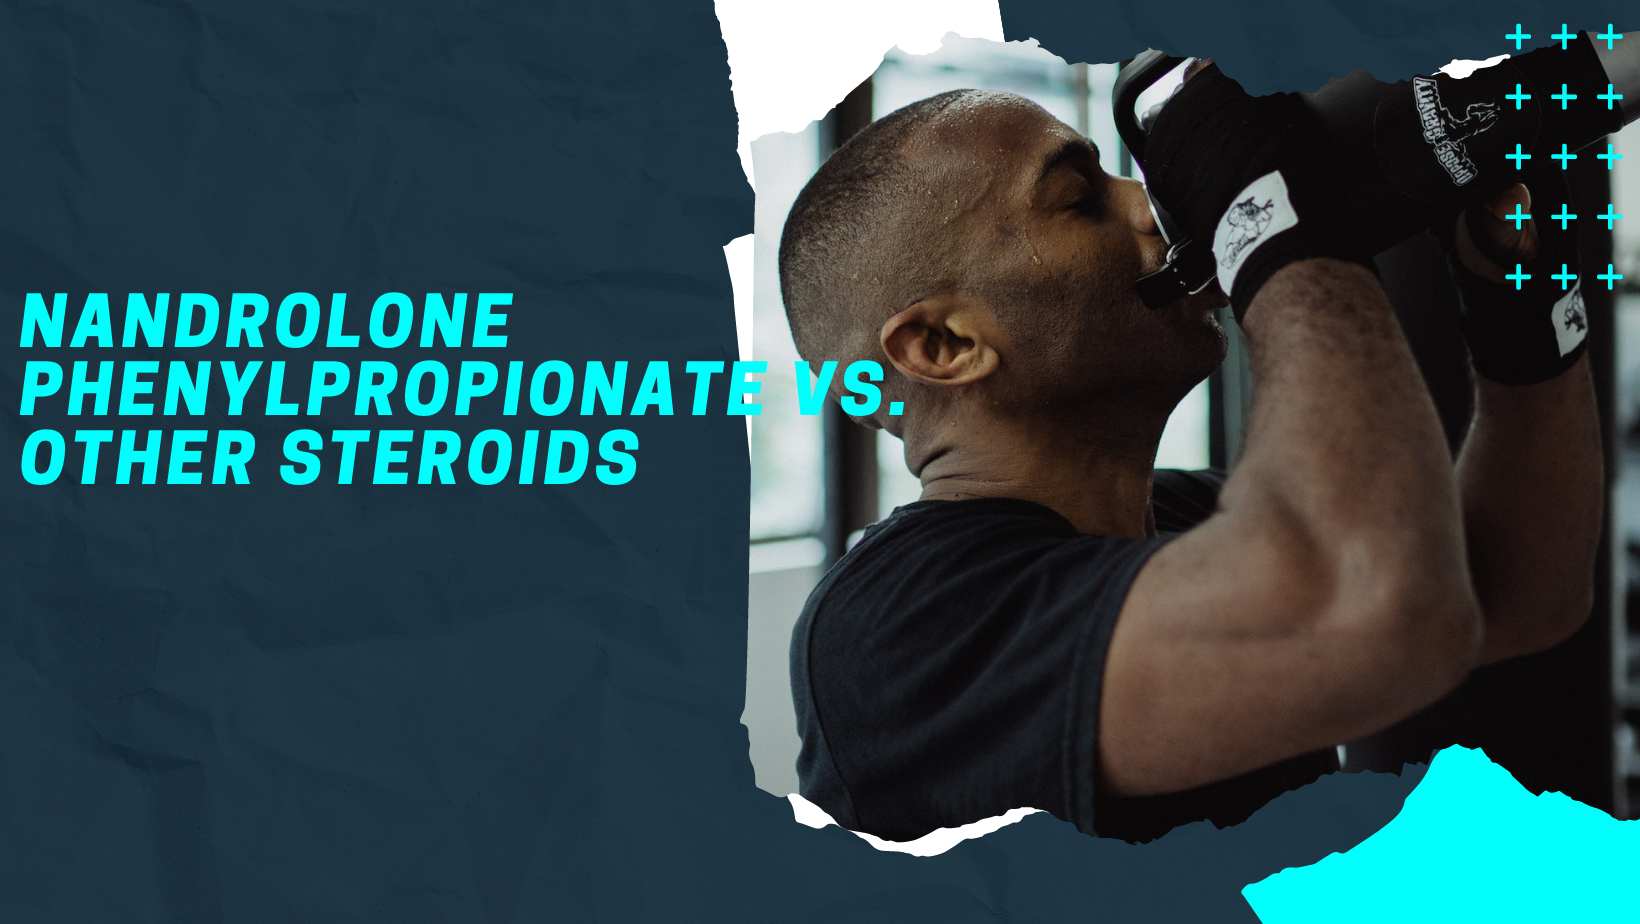 Nandrolone Phenylpropionate vs. Other Steroids